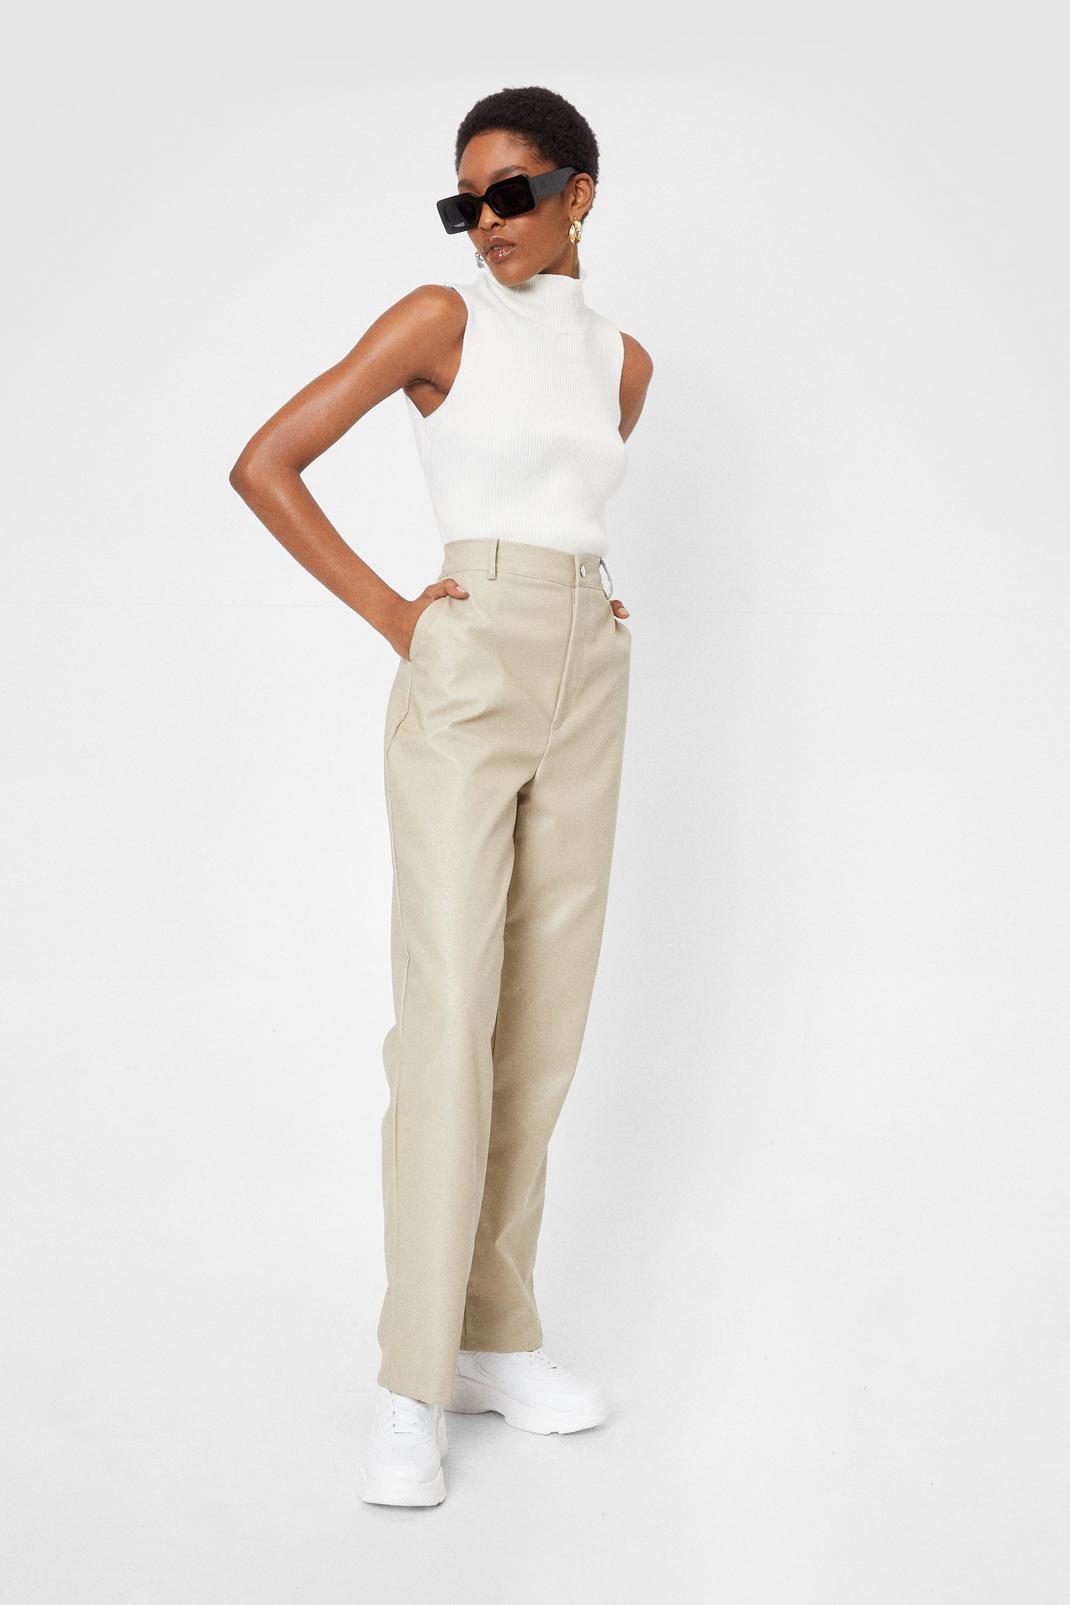 https://media.nastygal.com/i/nastygal/agg02788_taupe_xl/female-taupe-seam-detail-high-waisted-faux-leather-trousers/?w=1070&qlt=default&fmt.jp2.qlt=70&fmt=auto&sm=fit